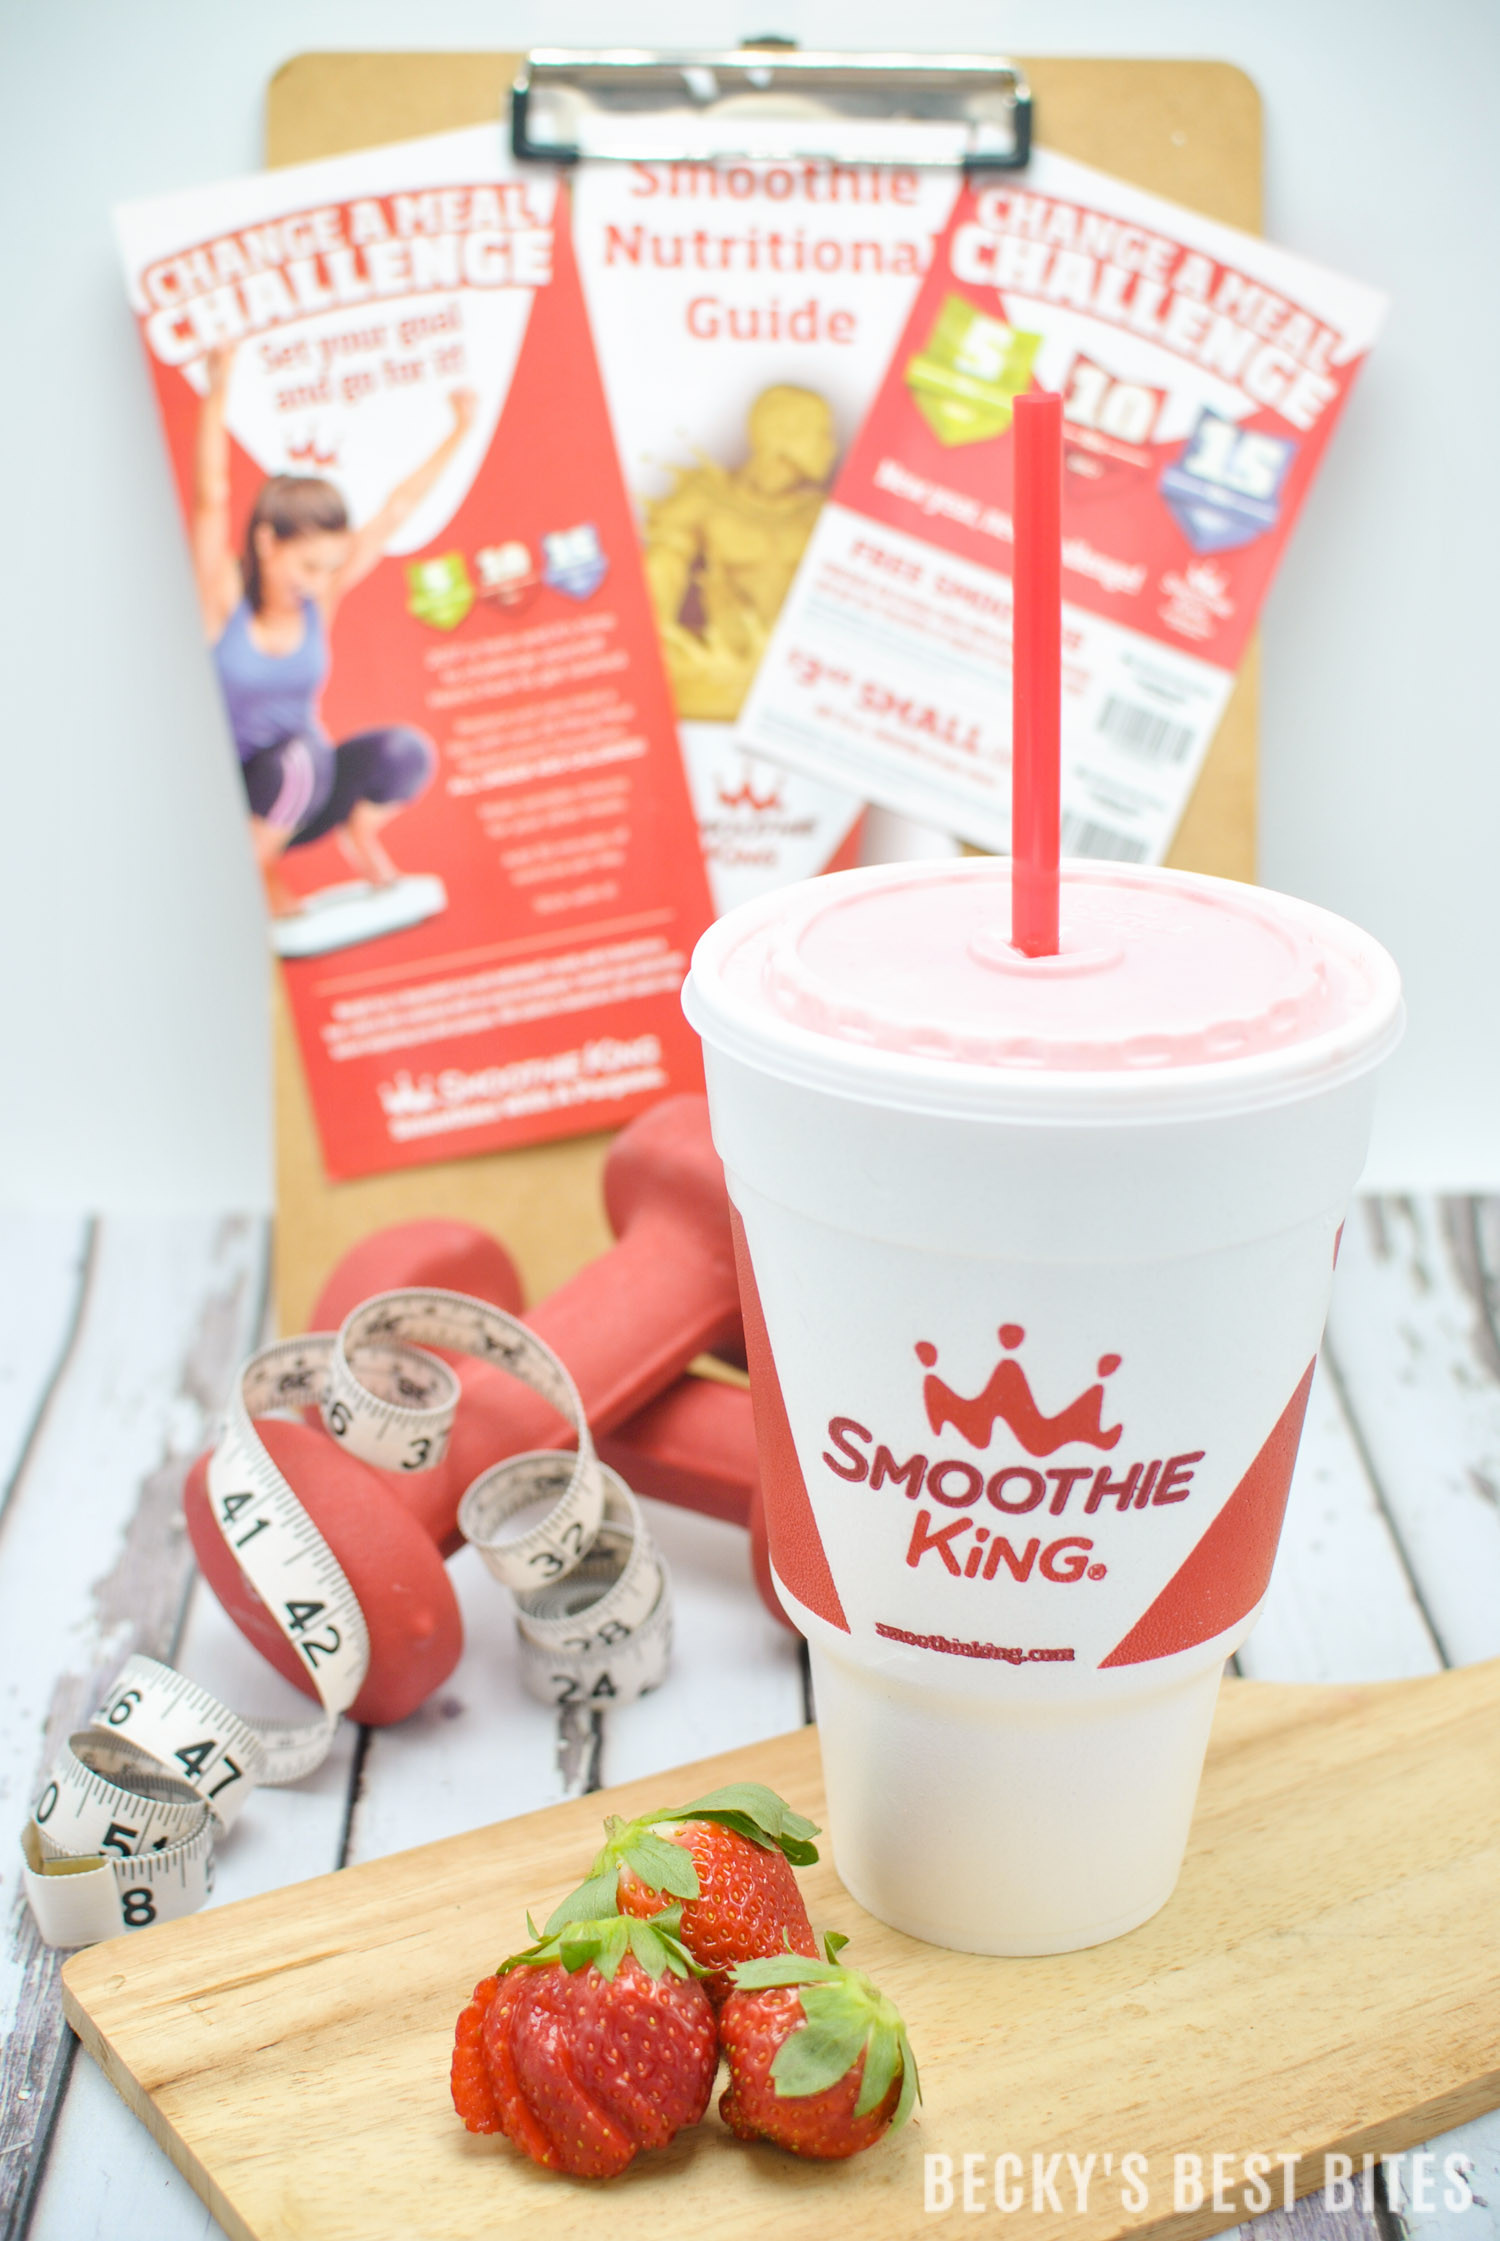 Smoothie King Meal Replacement Smoothies
 Change A Meal Challenge with Smoothie King 3 Becky s